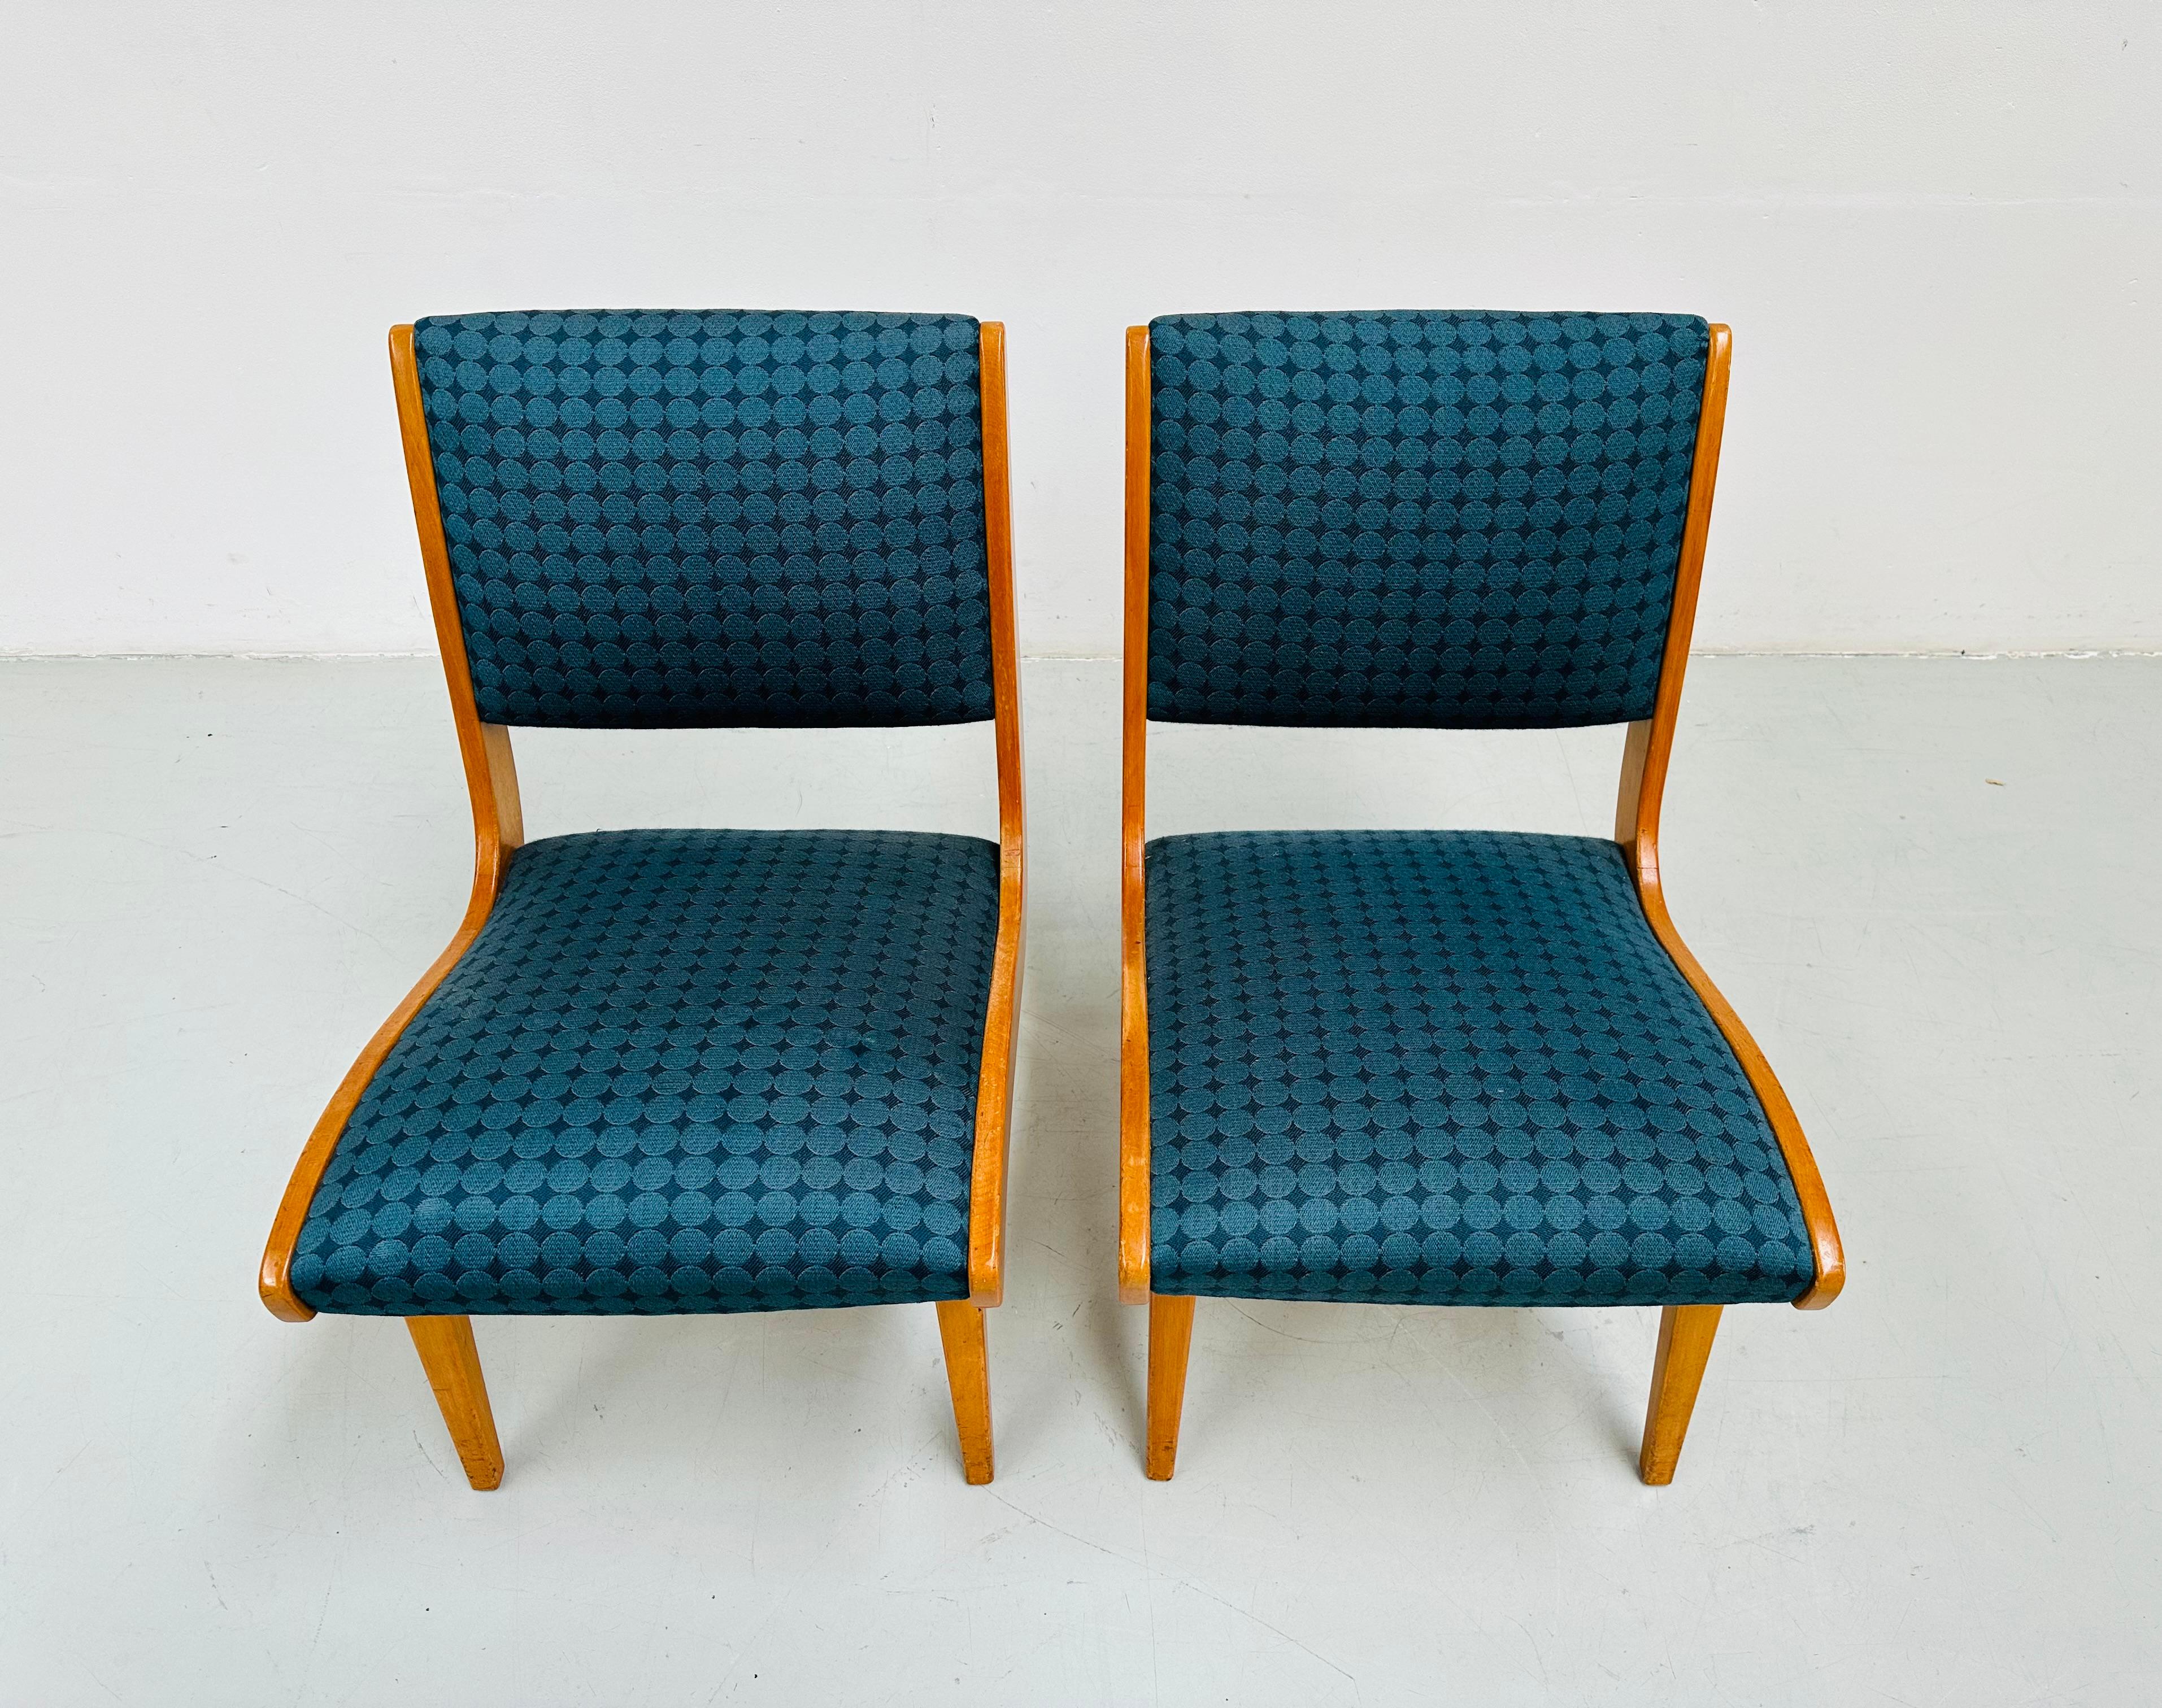 1950s Rare Set Vostra Chairs Numbered & Original Fabric by Jens Risom for Knoll. For Sale 8